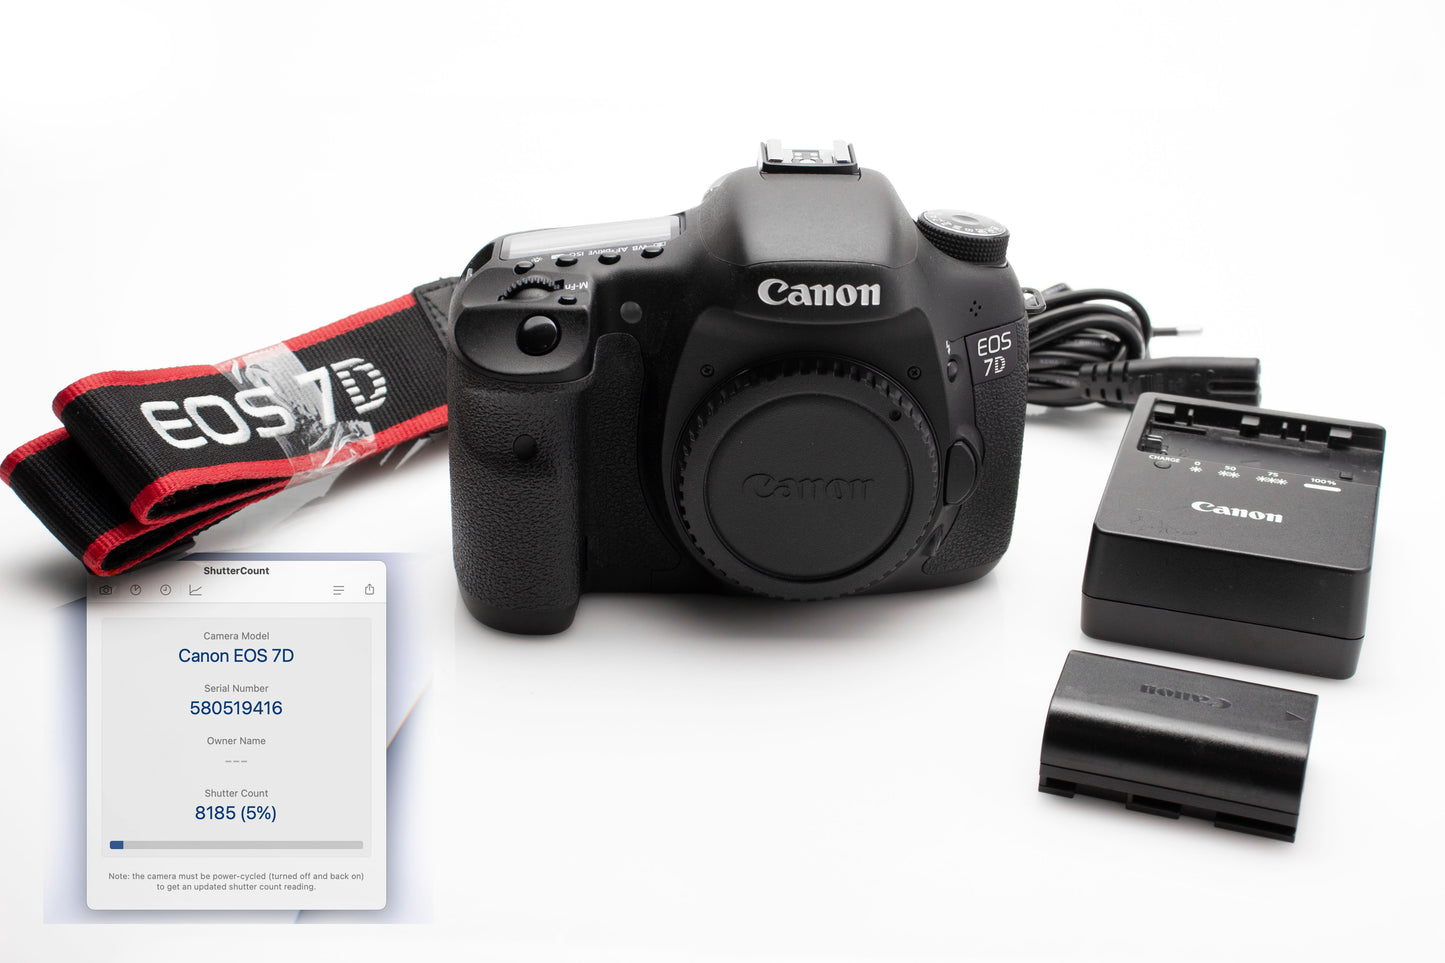 Used Canon 7D 18.0MP BODY